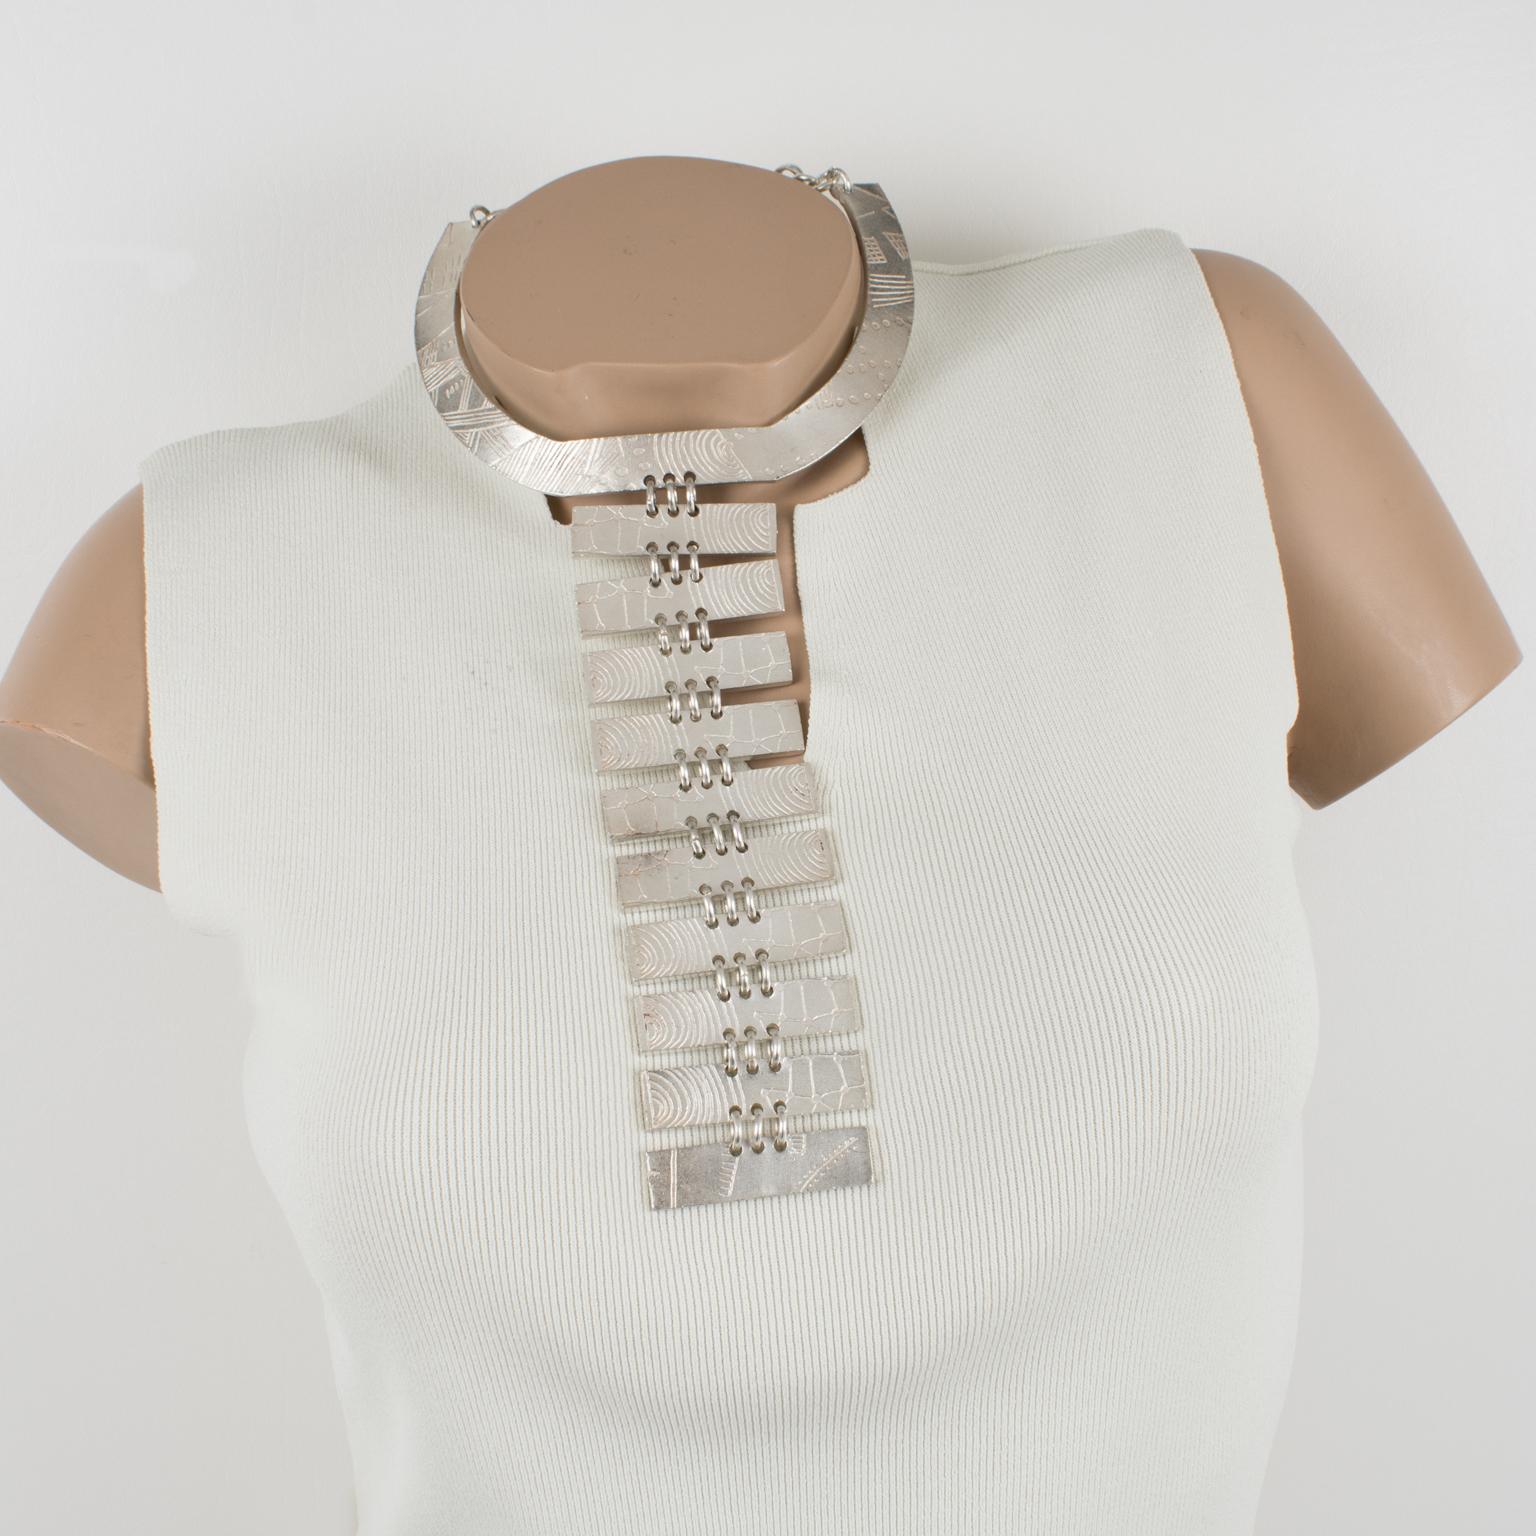 Nelly Biche de Bere Paris designed this impressive futuristic silver plate plastron necklace. The pendant necklace features a chunky massive oversized neck-tie shape with a graffiti design. The intricate design boasts stylized lines and curves like